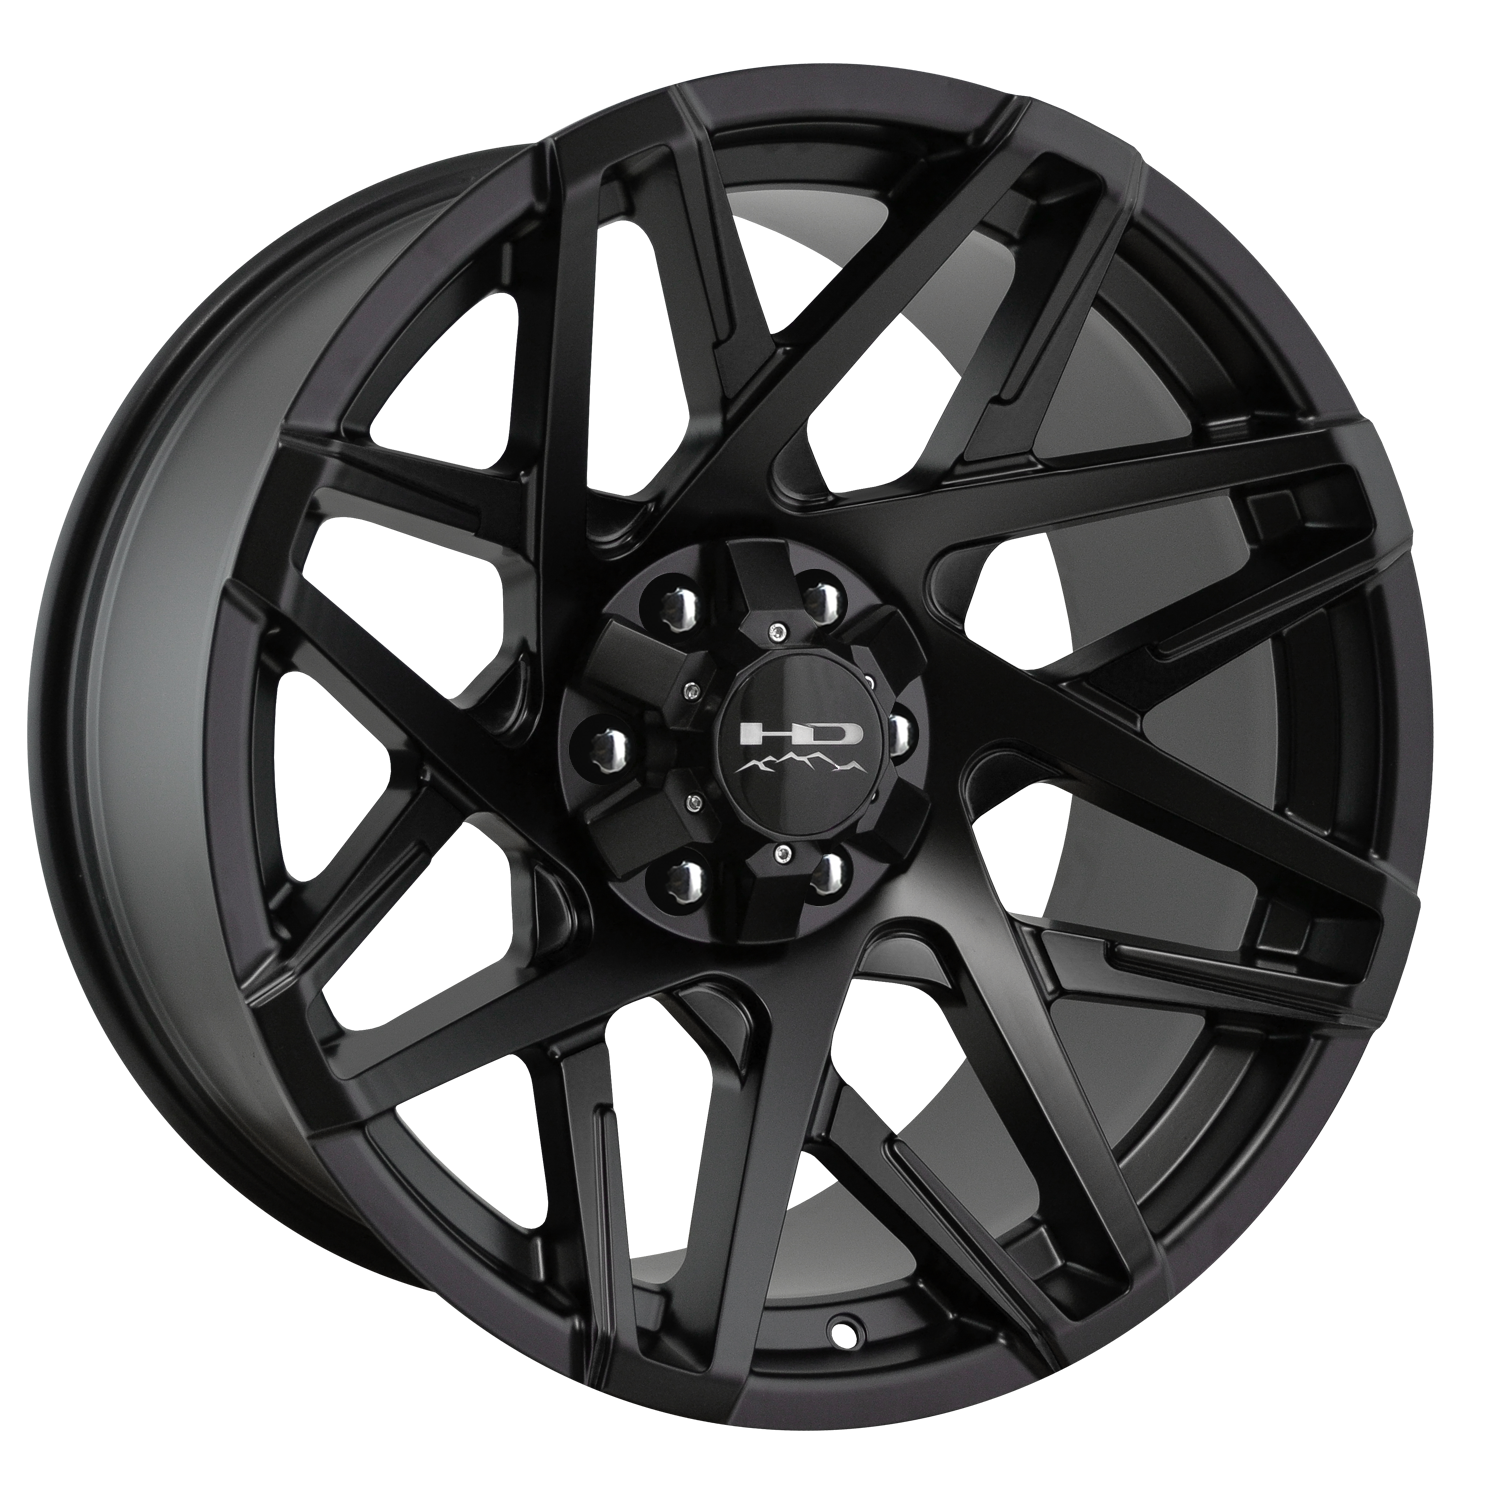 HD Off-Road Wheels - Canyon - Offroad Truck & SUV - Part Number: CY3201066-25ASB Wheel